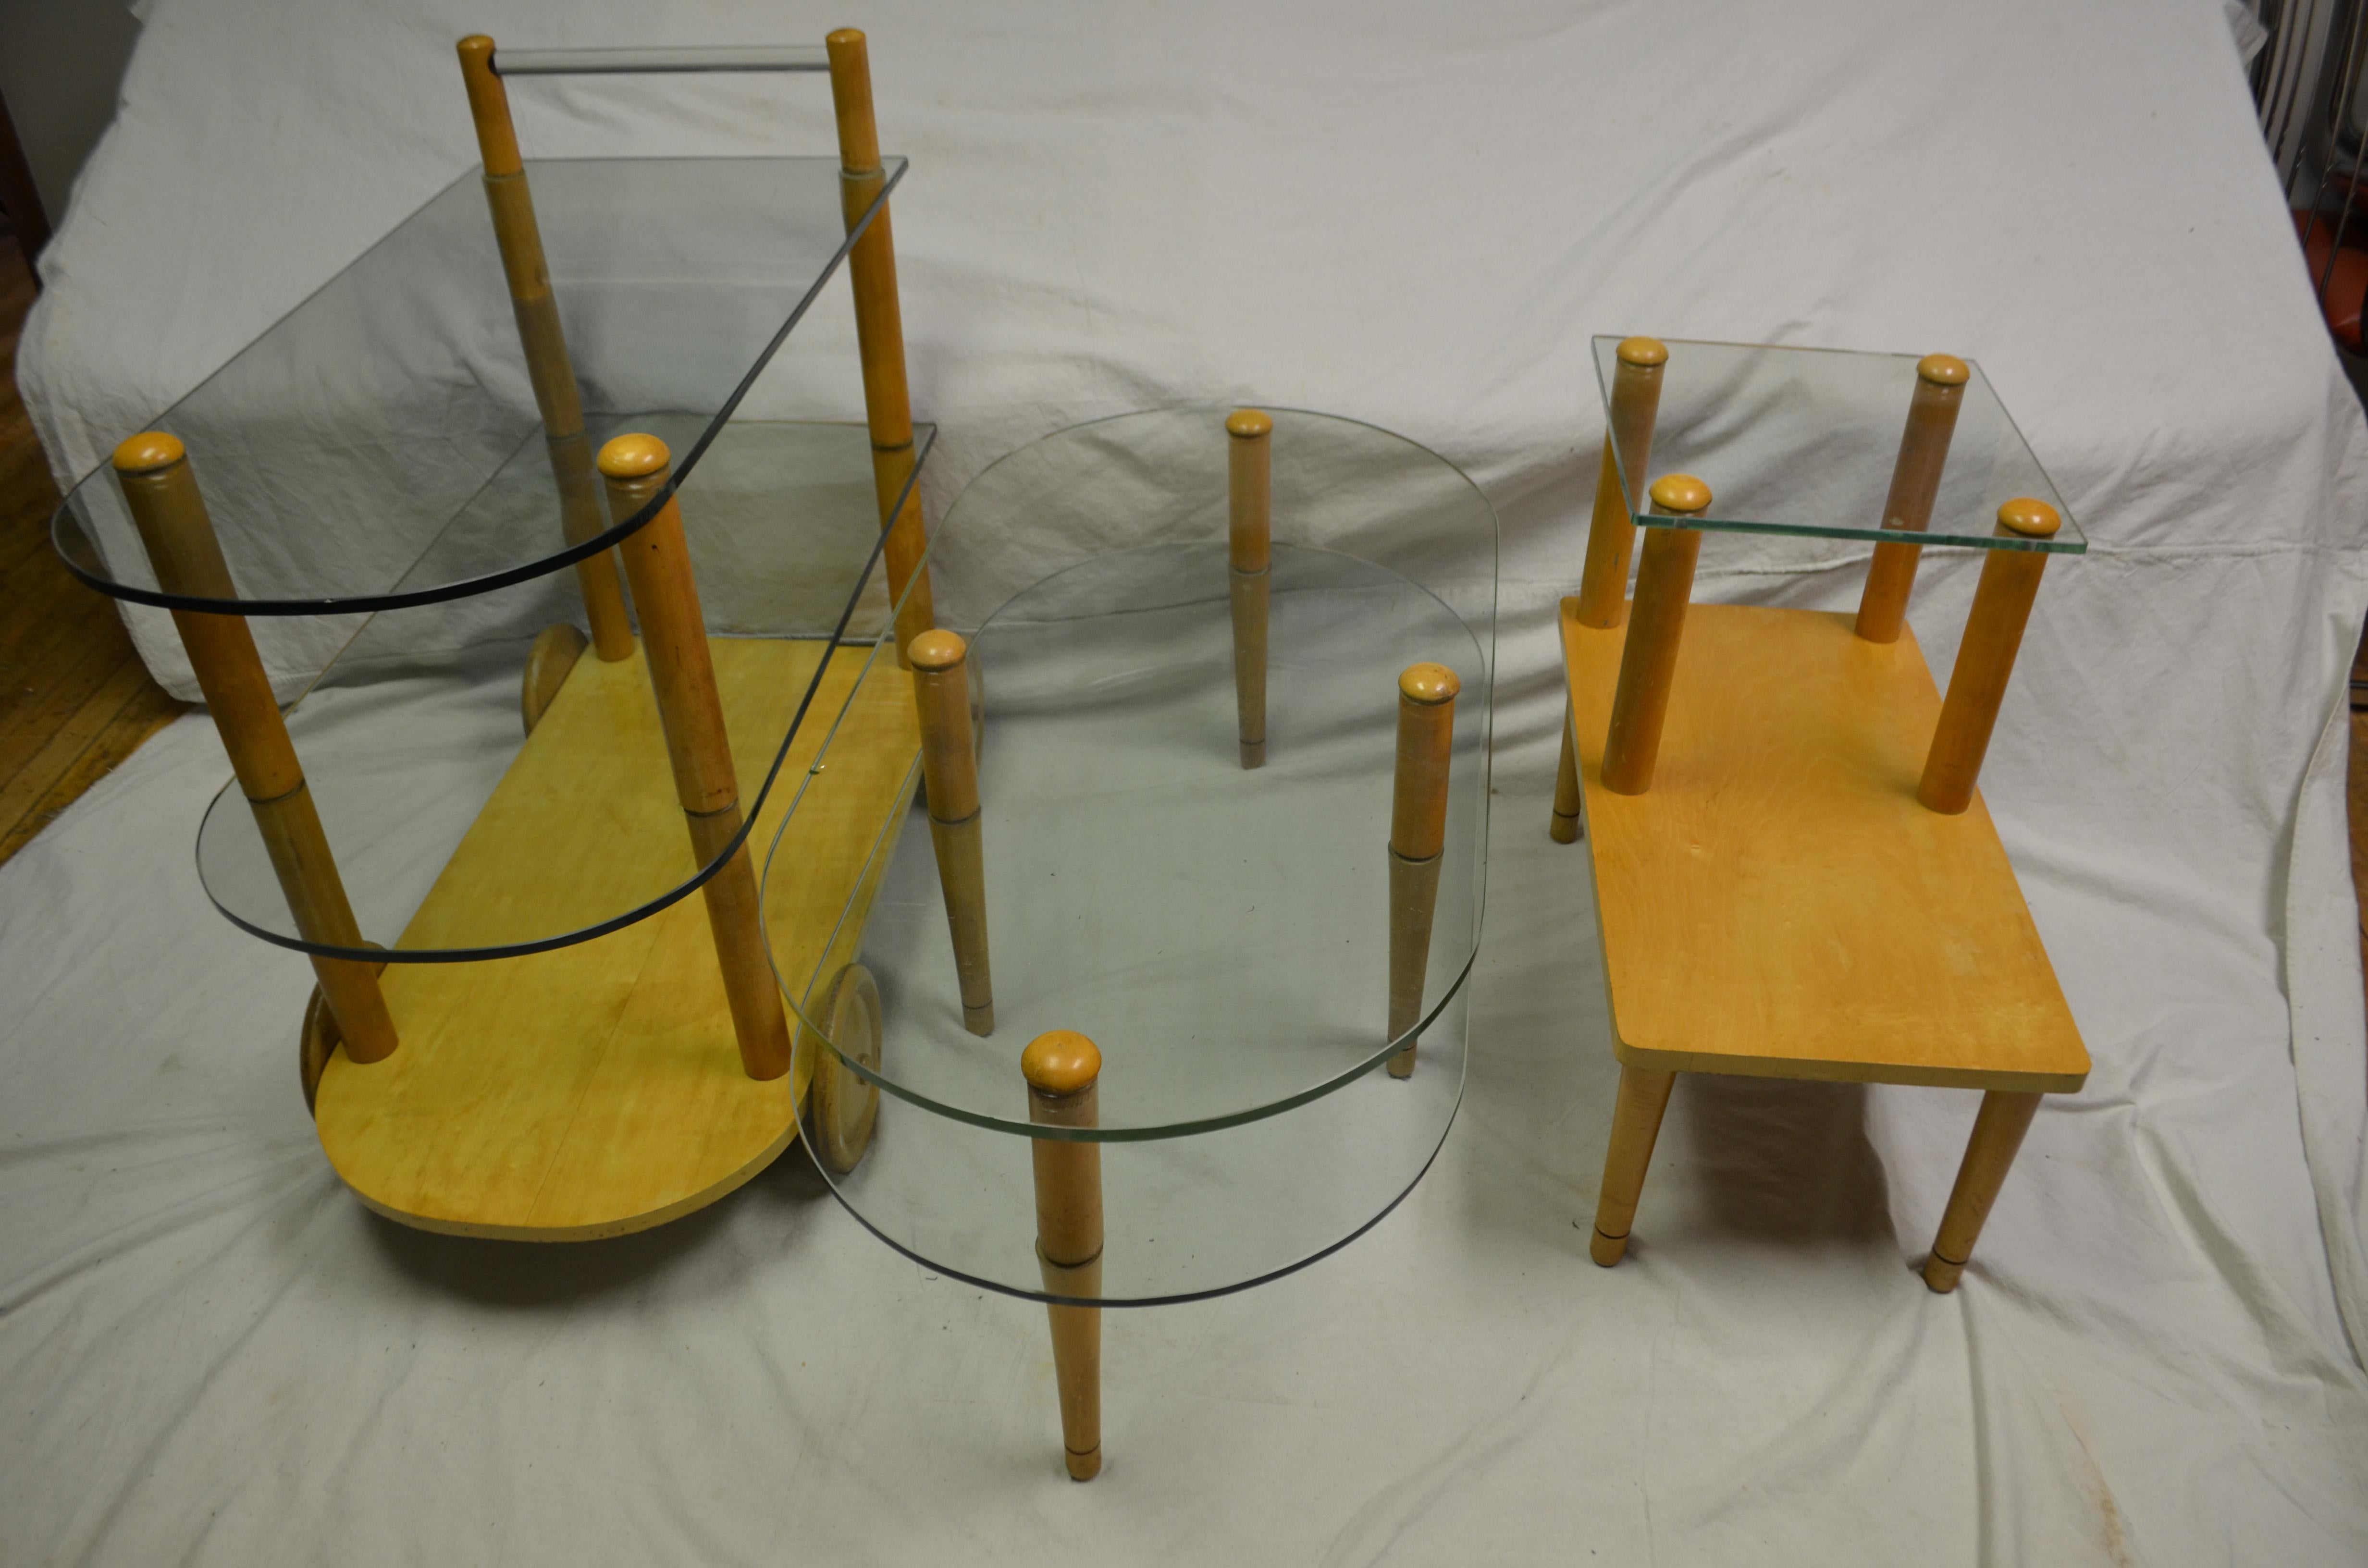 Designer Gilbert Rohde's set of three pieces in midcentury style of glass and wood. Sculptural in presentation and functional for home or office. Rohde was the Harbinger of the modern era and the designer often credited with transforming Herman